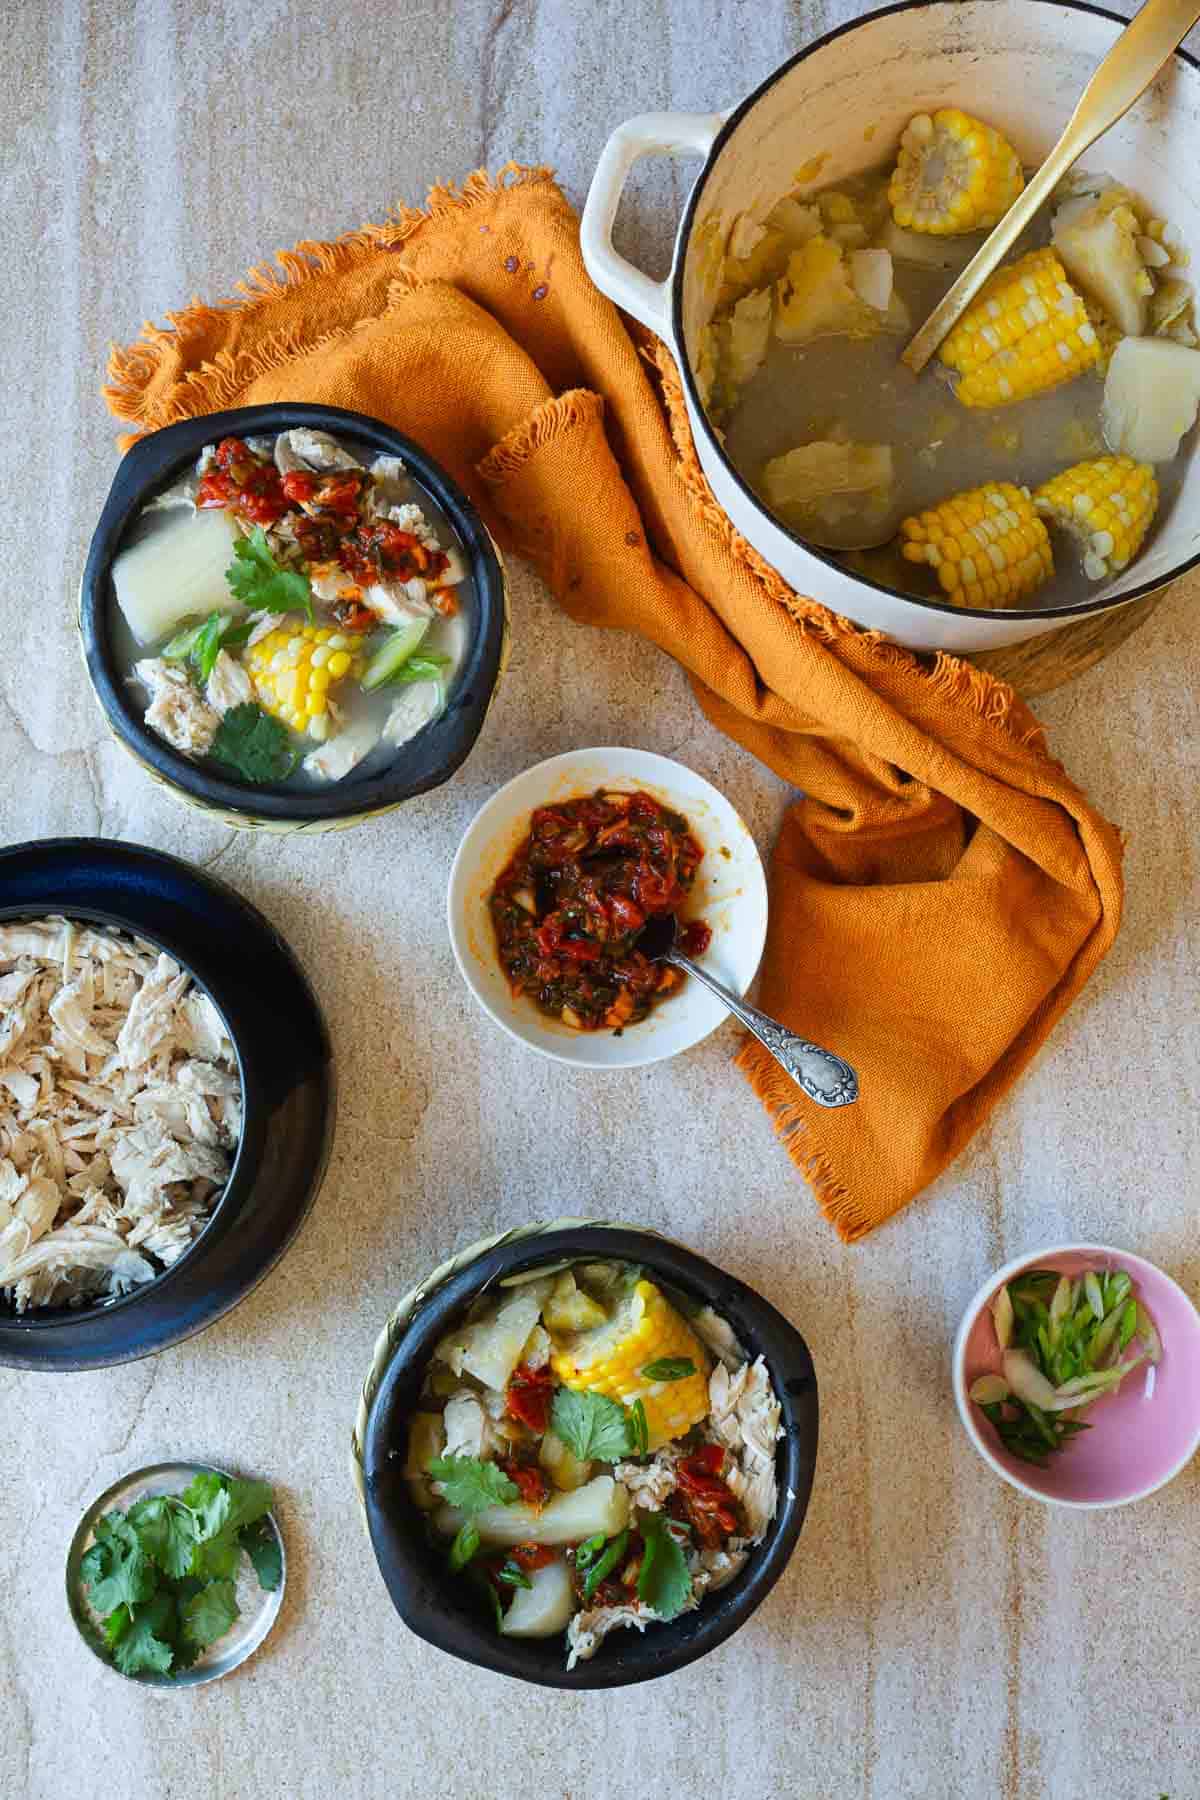 A flat lay photograph of a meal setup with two bowls of chicken soup, a side dish of salsa, shredded chicken on a plate, a pot containing corn cobs and ladle, and small bowls of herbs and onions, all arranged on a table with an orange cloth napkin.